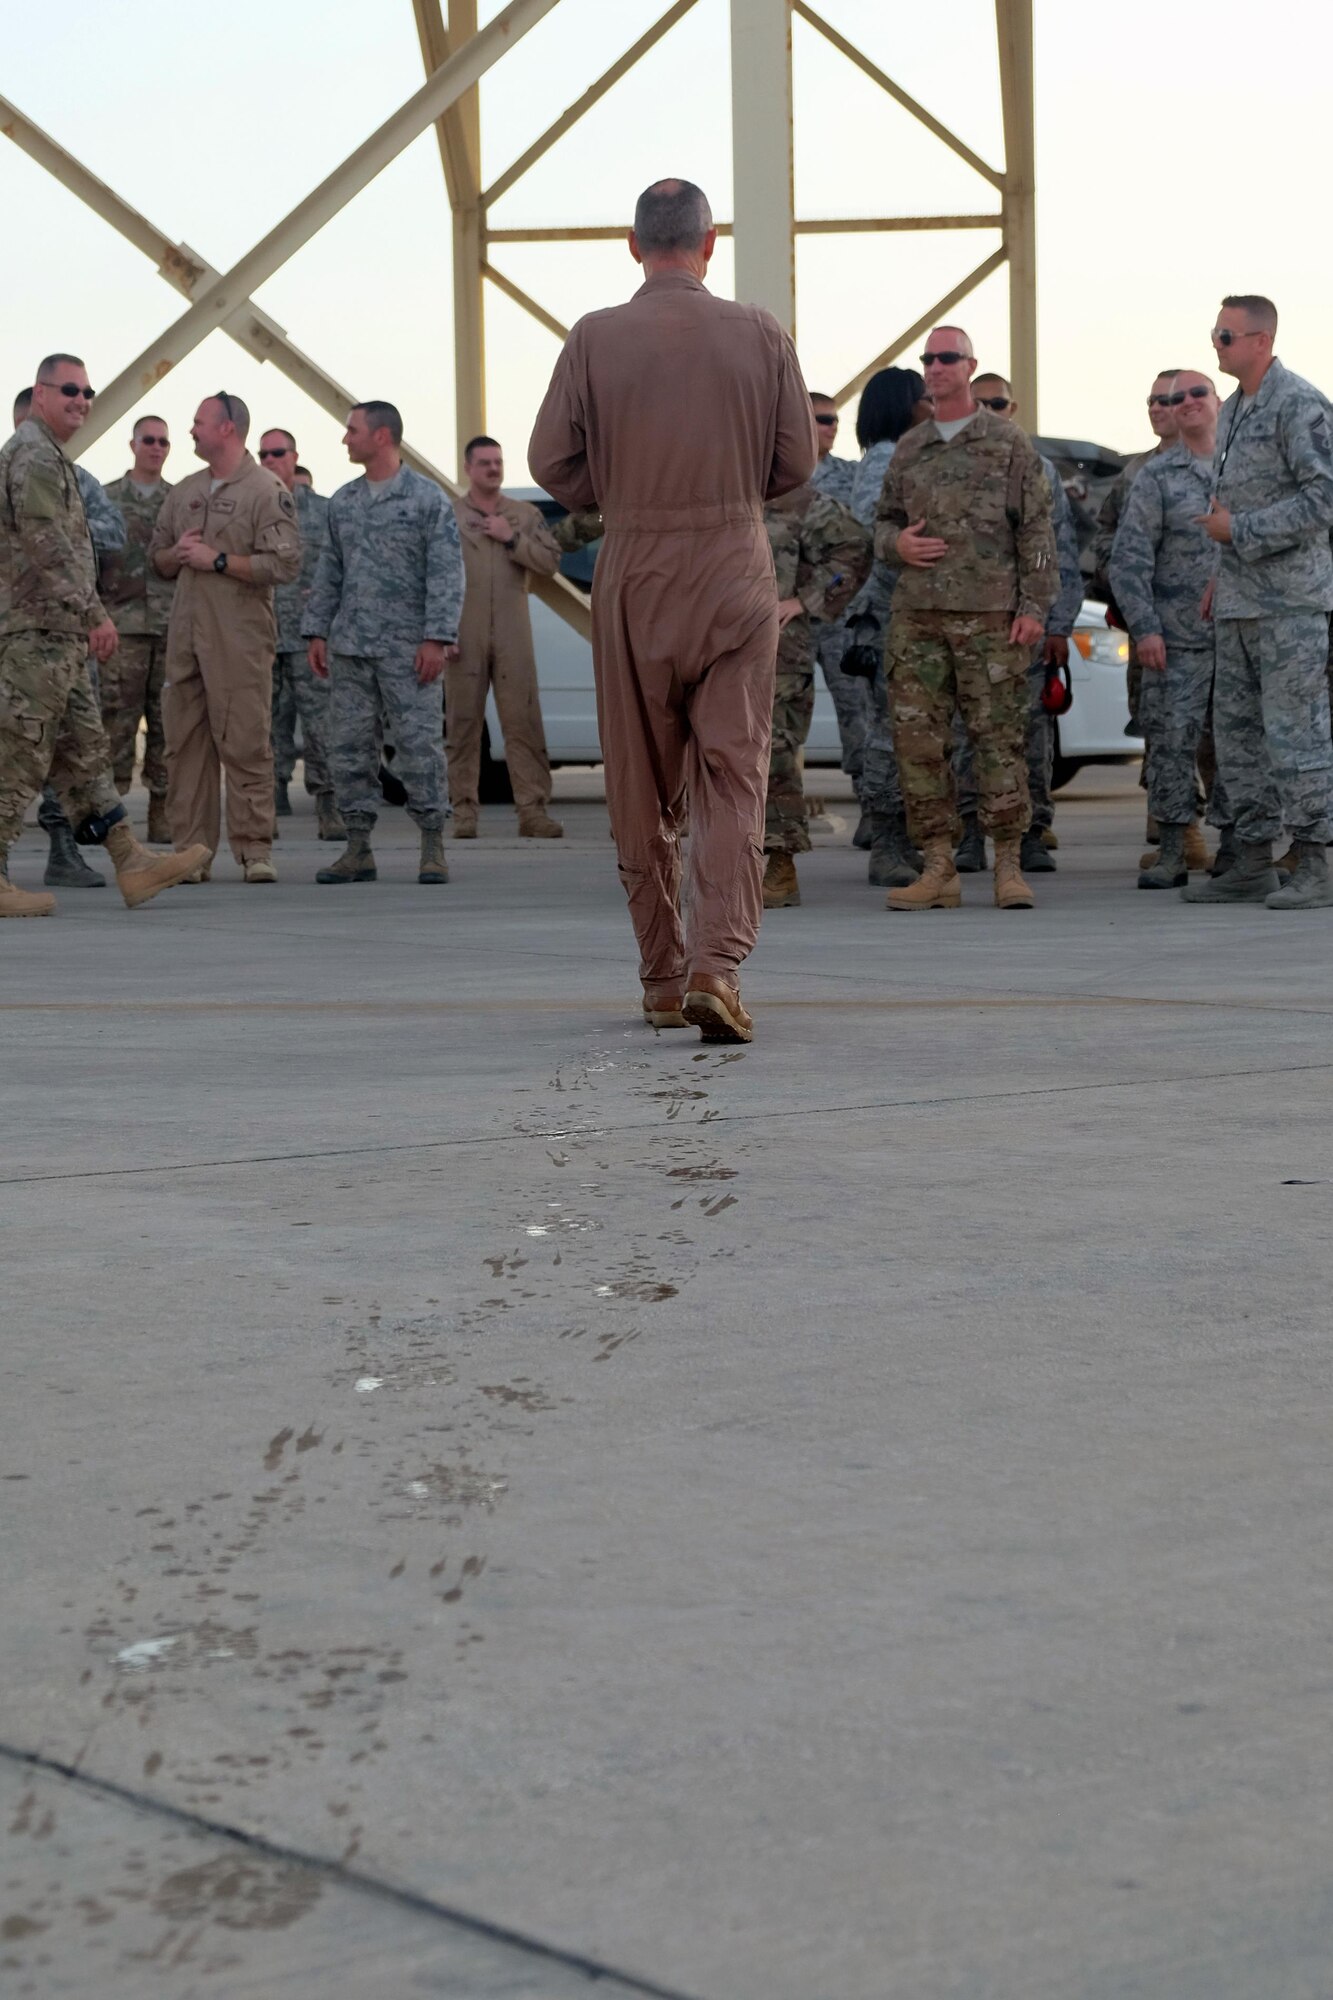 Brig. Gen. Charles S. Corcoran, 380th Air Expeditionary Wing commander, walks to greet Airmen of the 380 AEW at his fini-flight June 30, 2017, at an undisclosed location in southwest Asia. Before departing, Corcoran greeted every Airman in attendance to thank them for their service. (U.S. Air Force photo by Senior Airman Preston Webb)